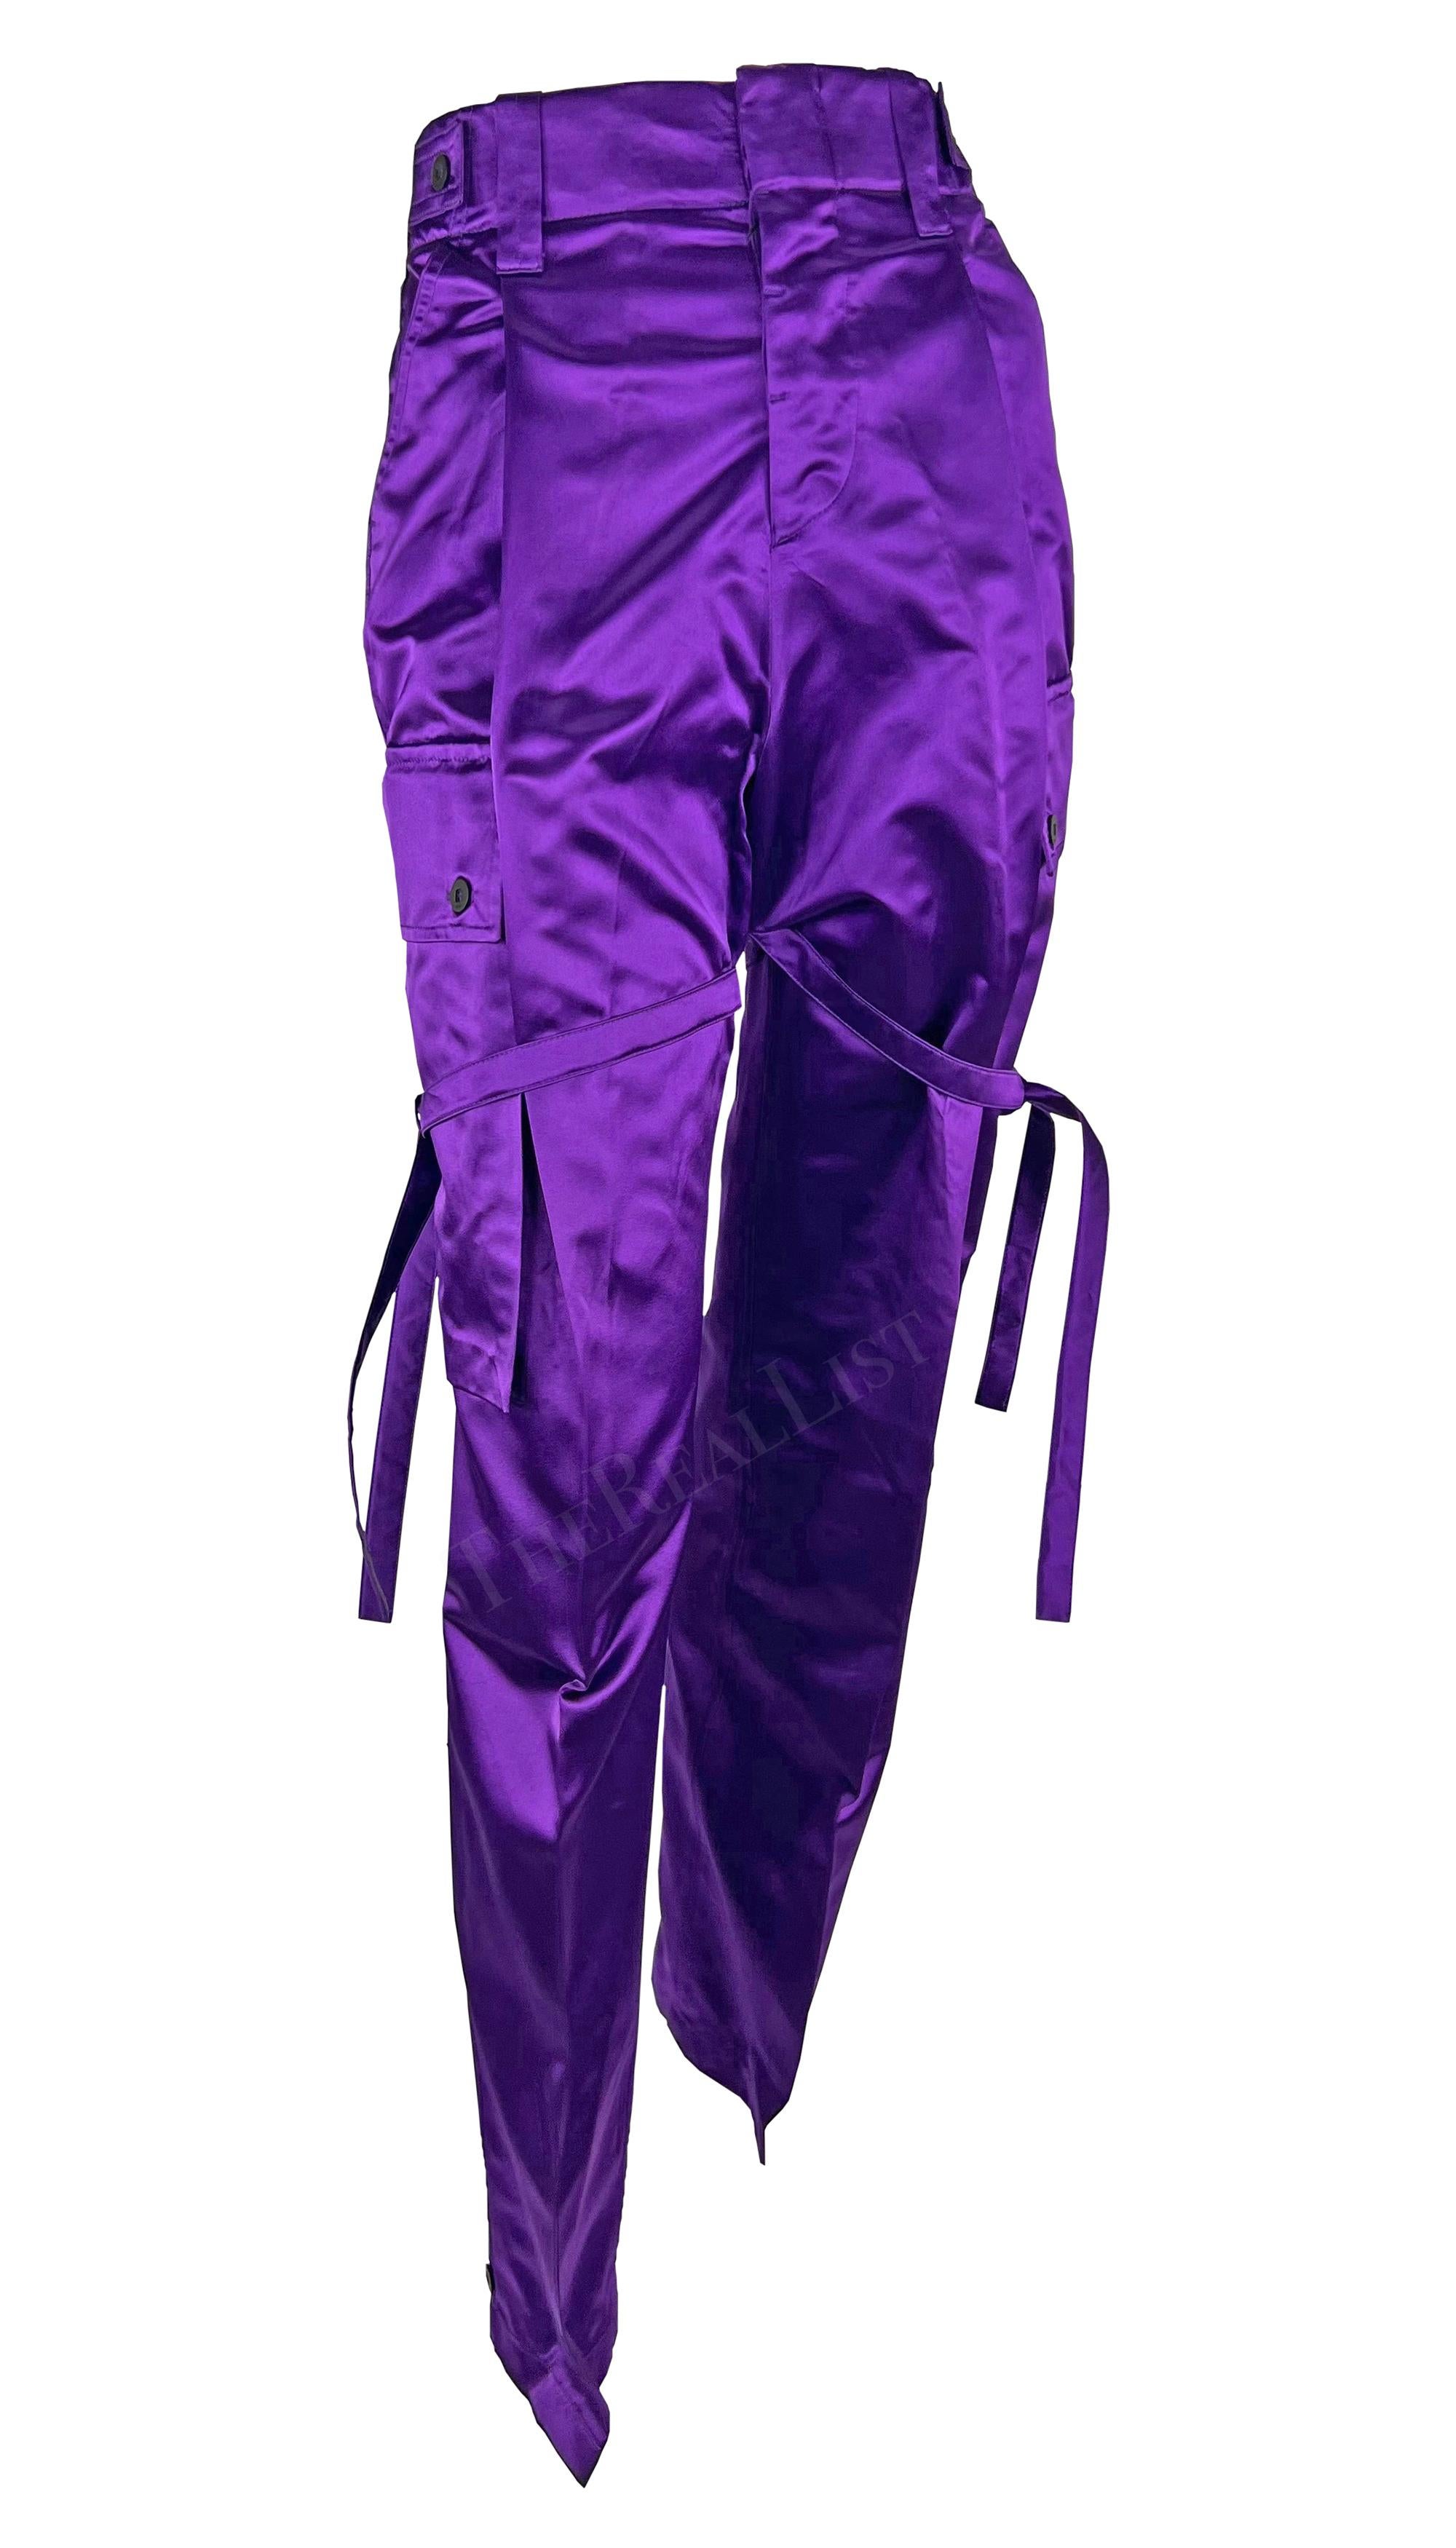 NWT S/S 2001 Gucci by Tom Ford Runway Purple Satin Tie Wide Leg Cargo Pants  For Sale 7